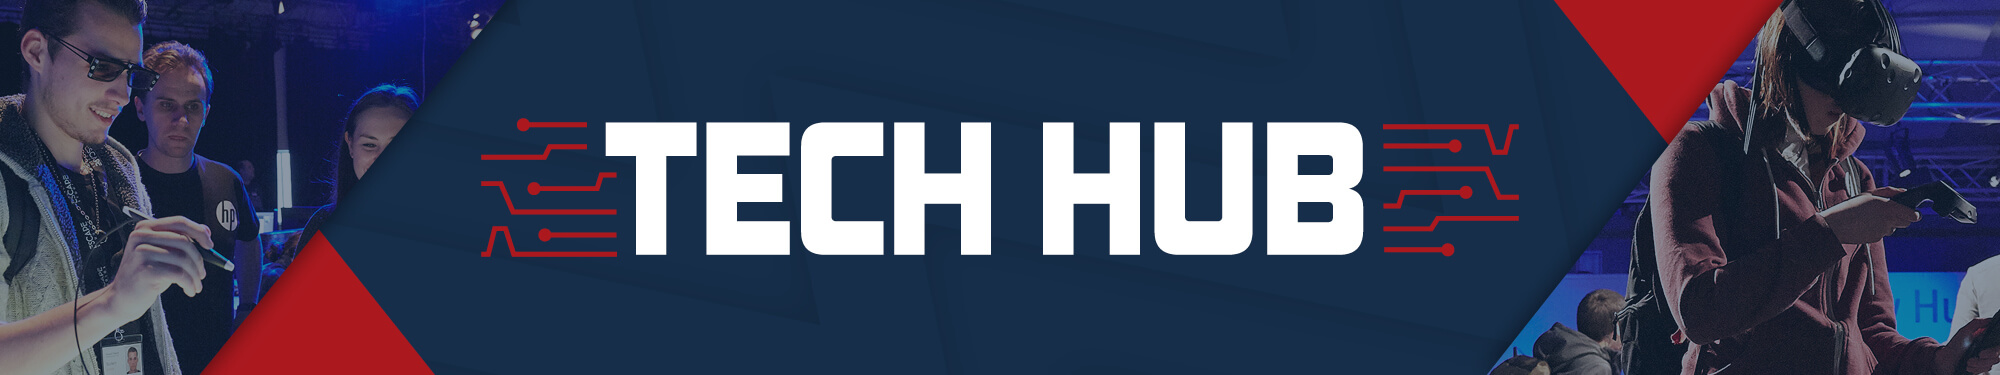 Tech Hub header - red and blue logo with people using VR either side